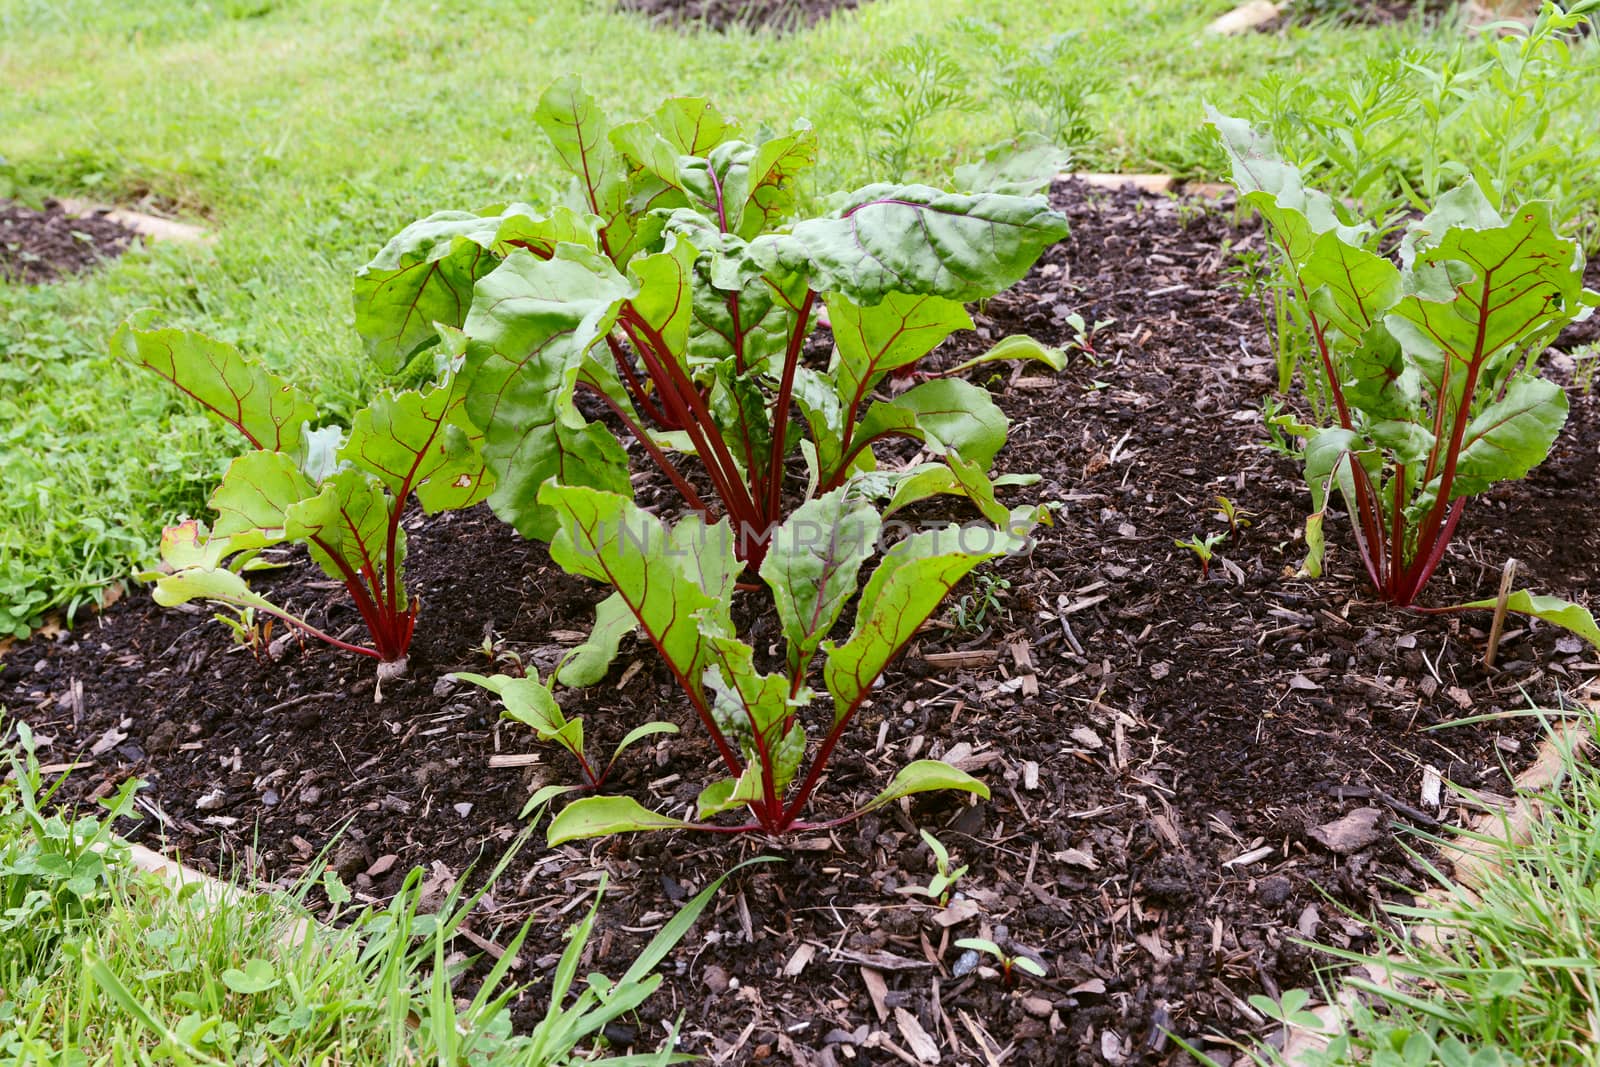 Vegetable bed full of beetroot plants with green leaves and deep red stems